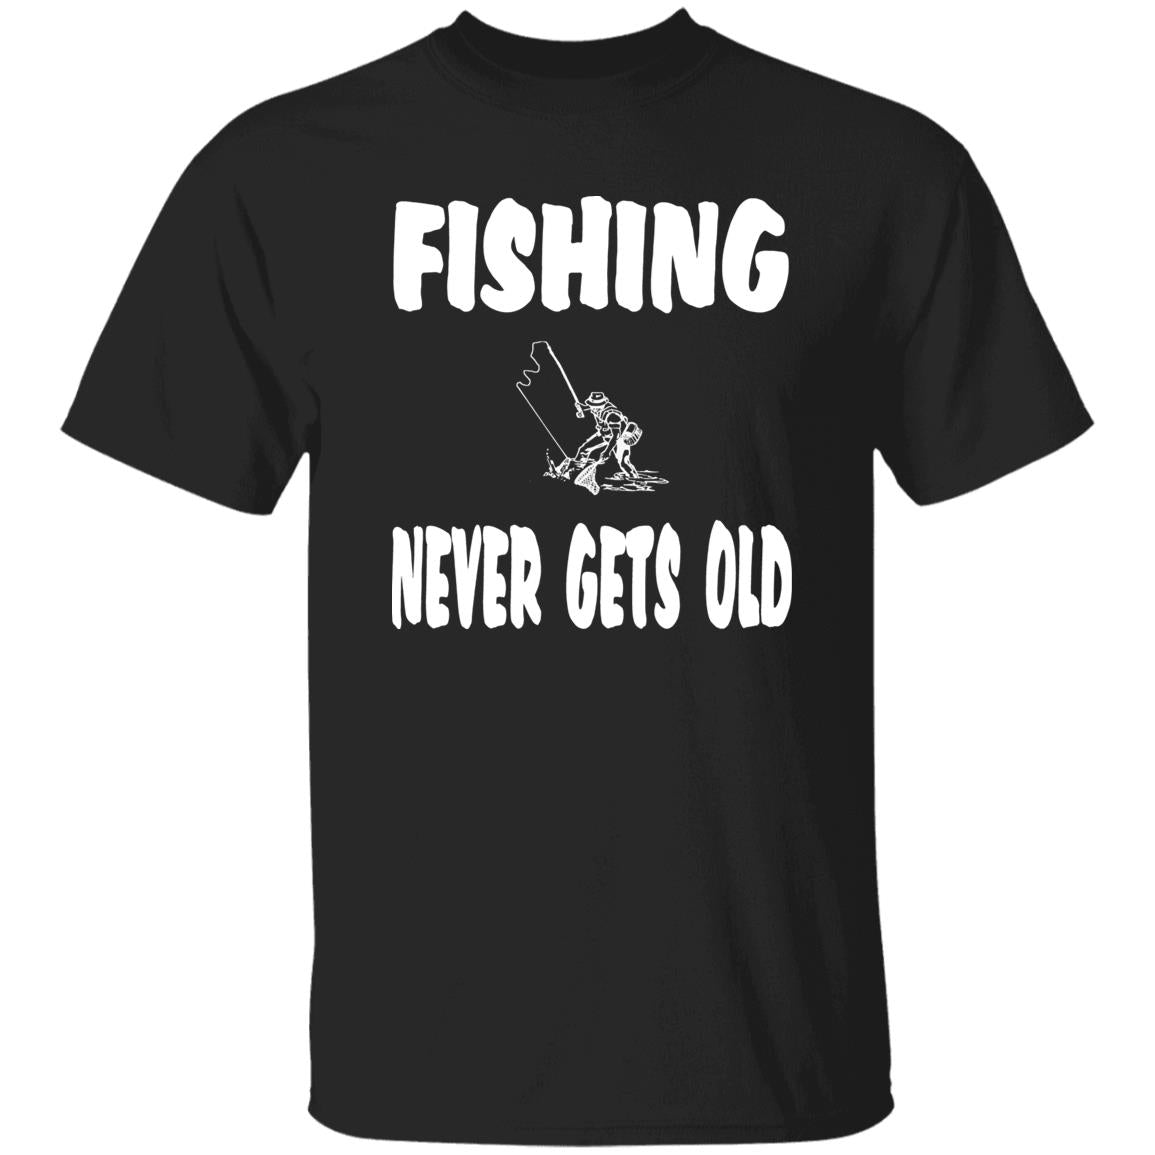 Fishing never gets old w t-shirt black